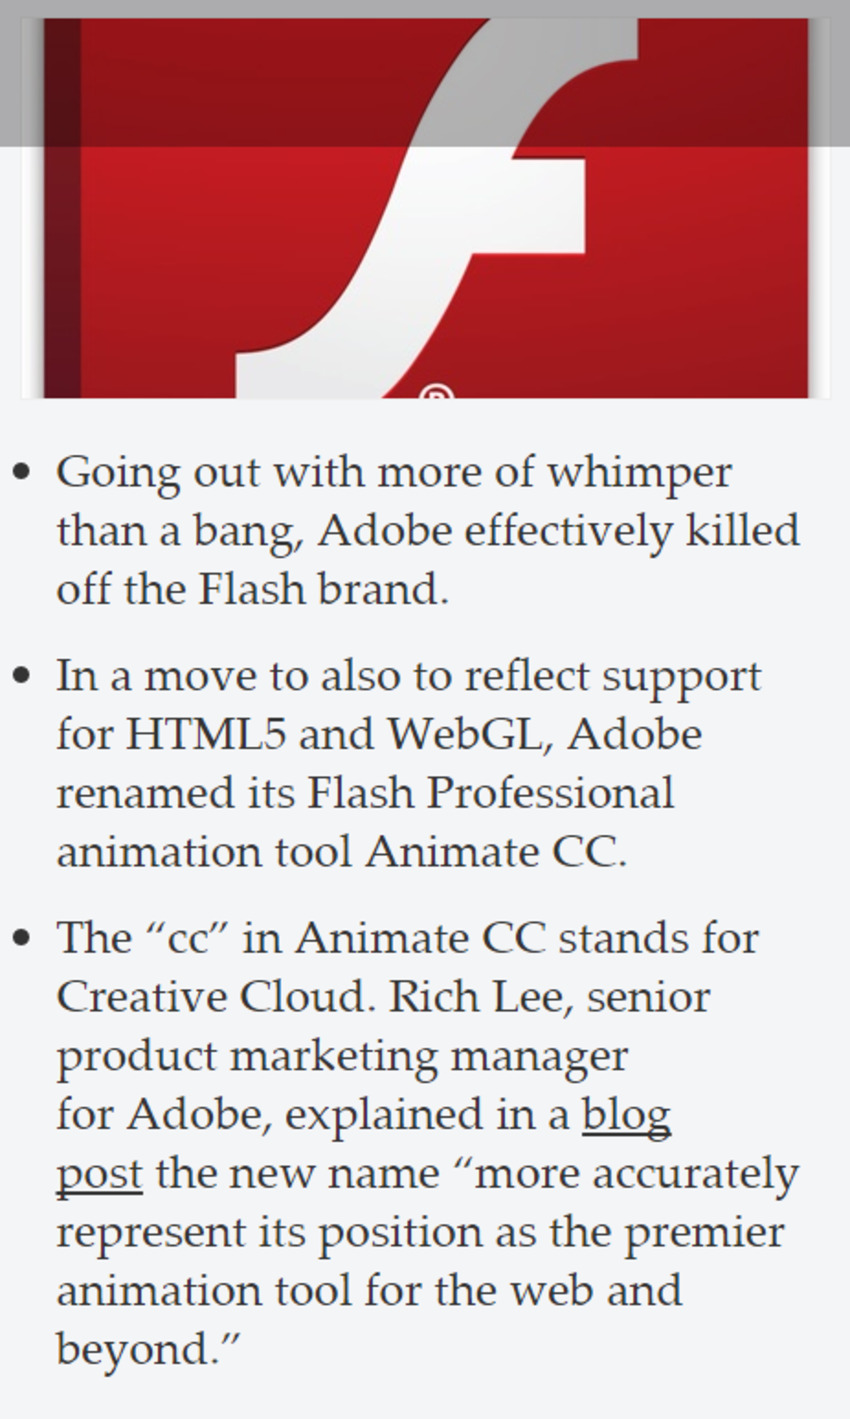 Adobe renames Flash, acknowledging the ailing brand is finally gone - MarketingDive | The MarTech Digest | Scoop.it